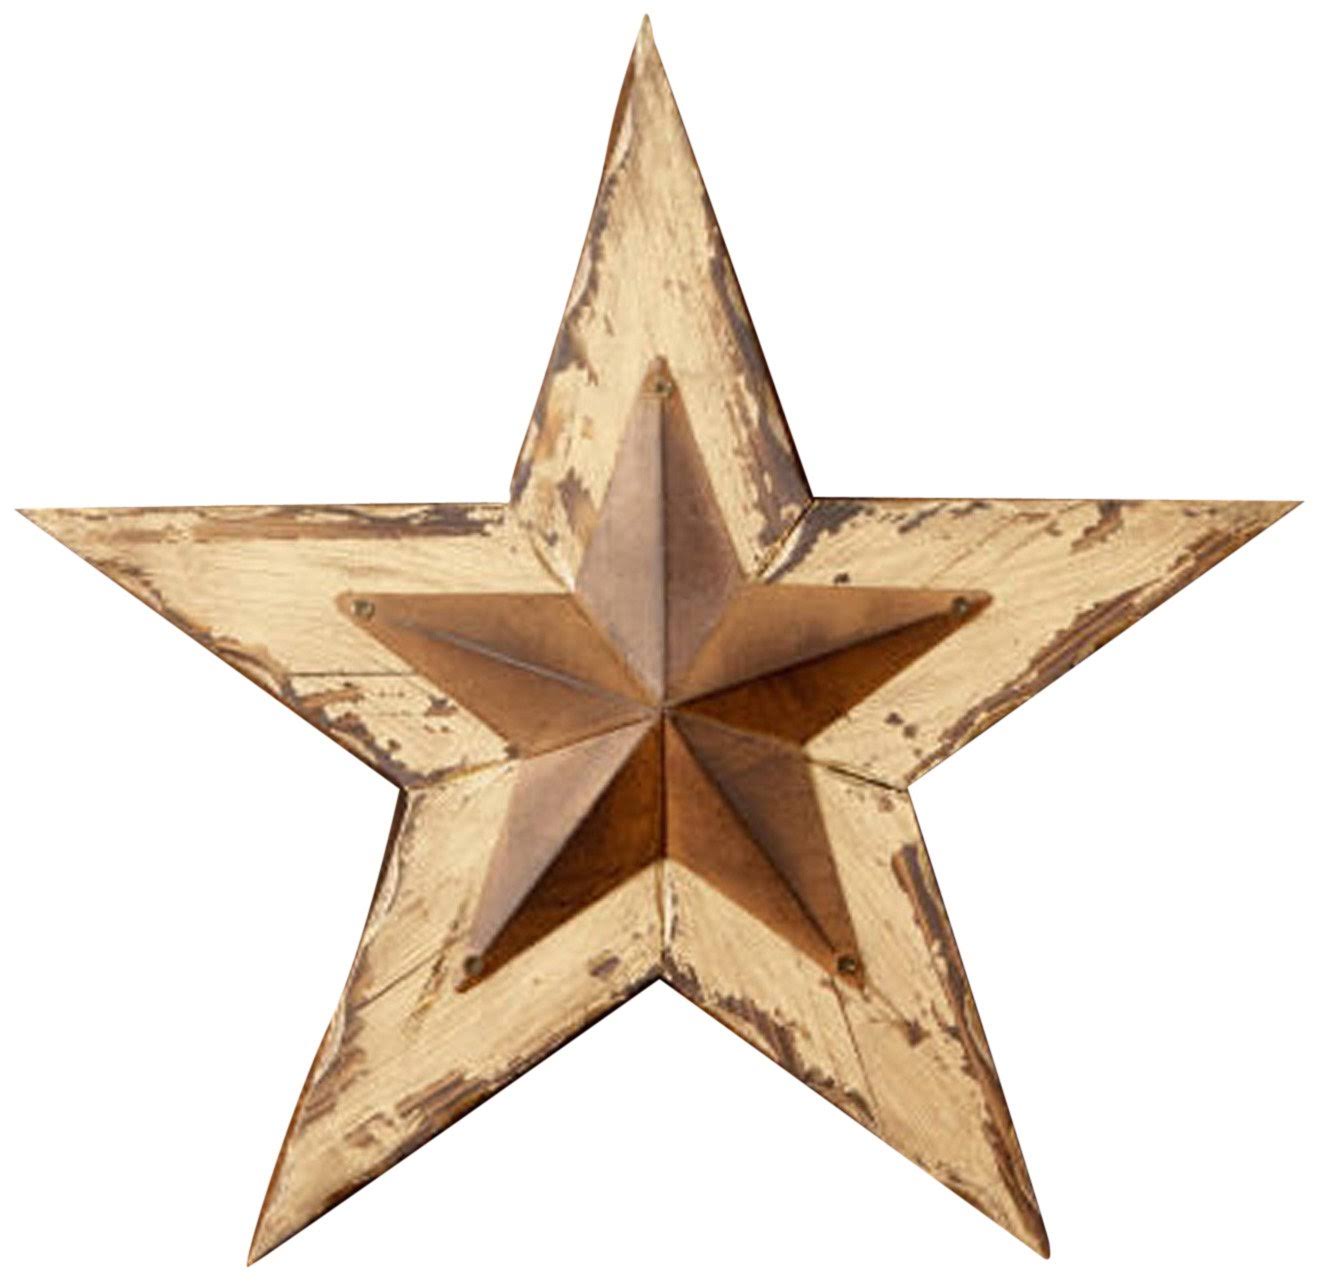 Your Hearts Delight Distressed Decor Wood with Rusty Star, 16 by 15-Inch, Tan